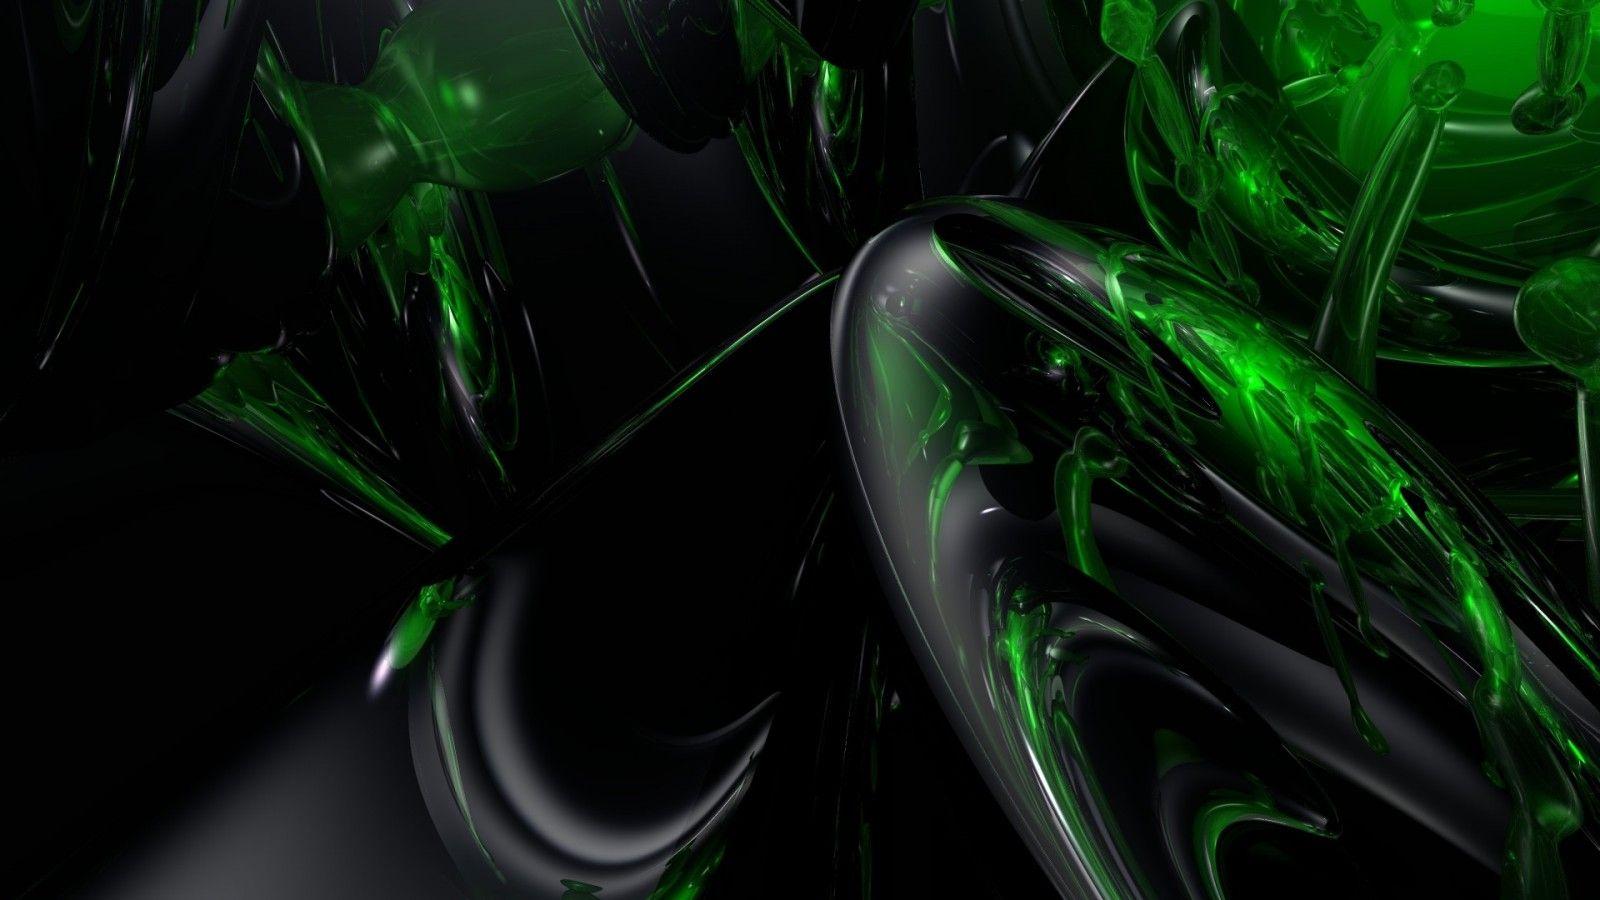 Green and Black Gaming Wallpapers - Top Free Green and Black Gaming